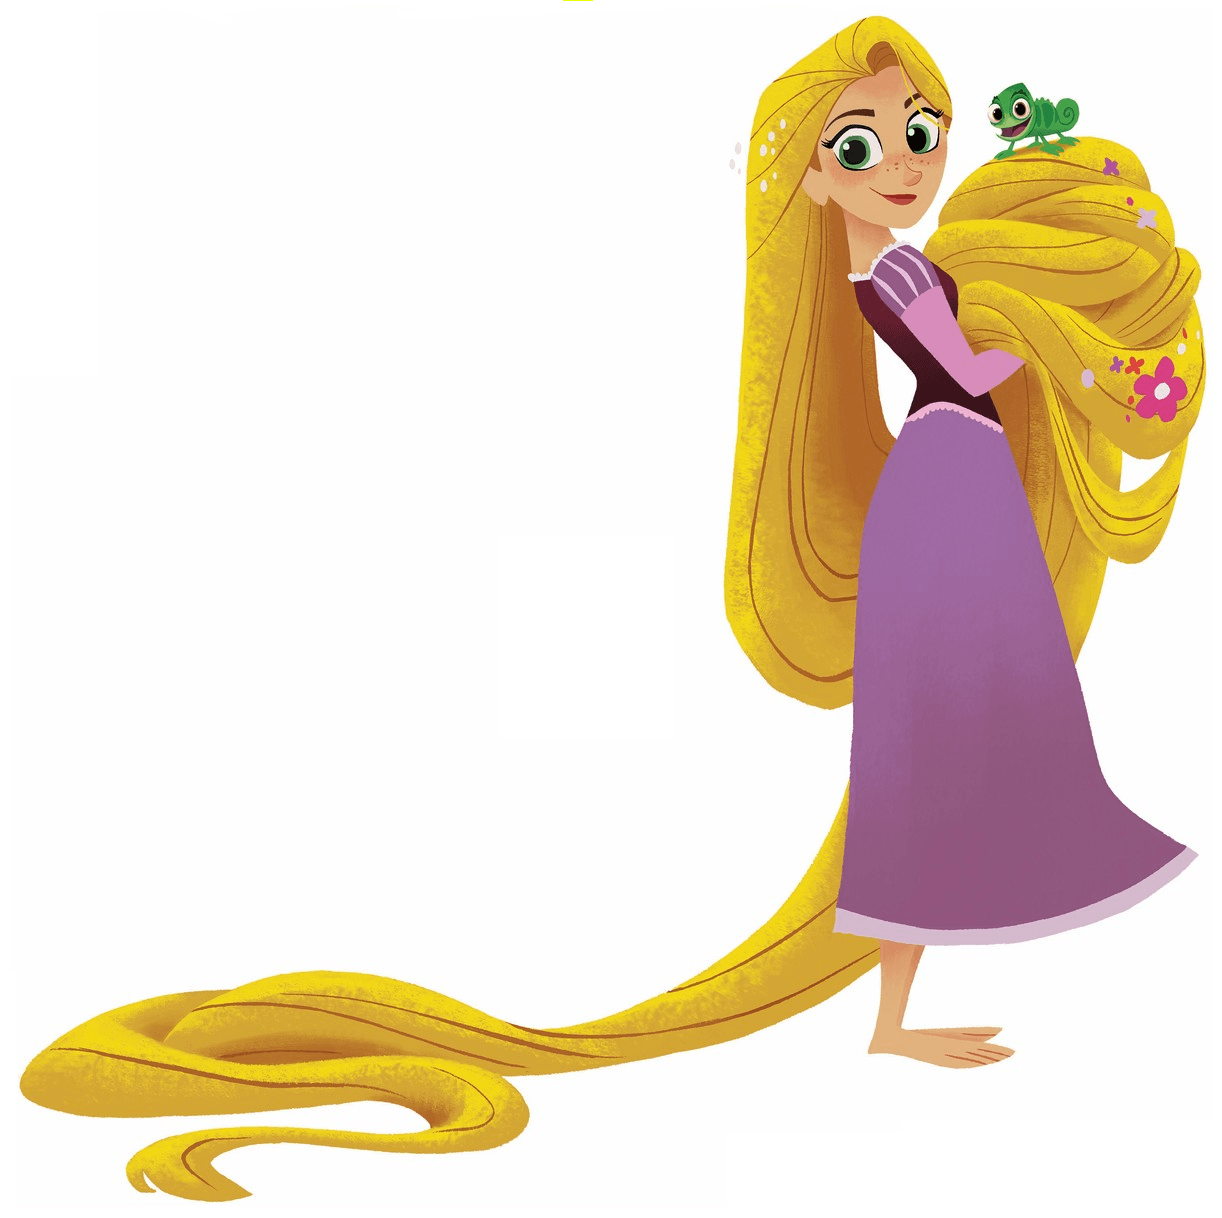 Disney Princess image Rapunzels look in Tangled Before Ever After